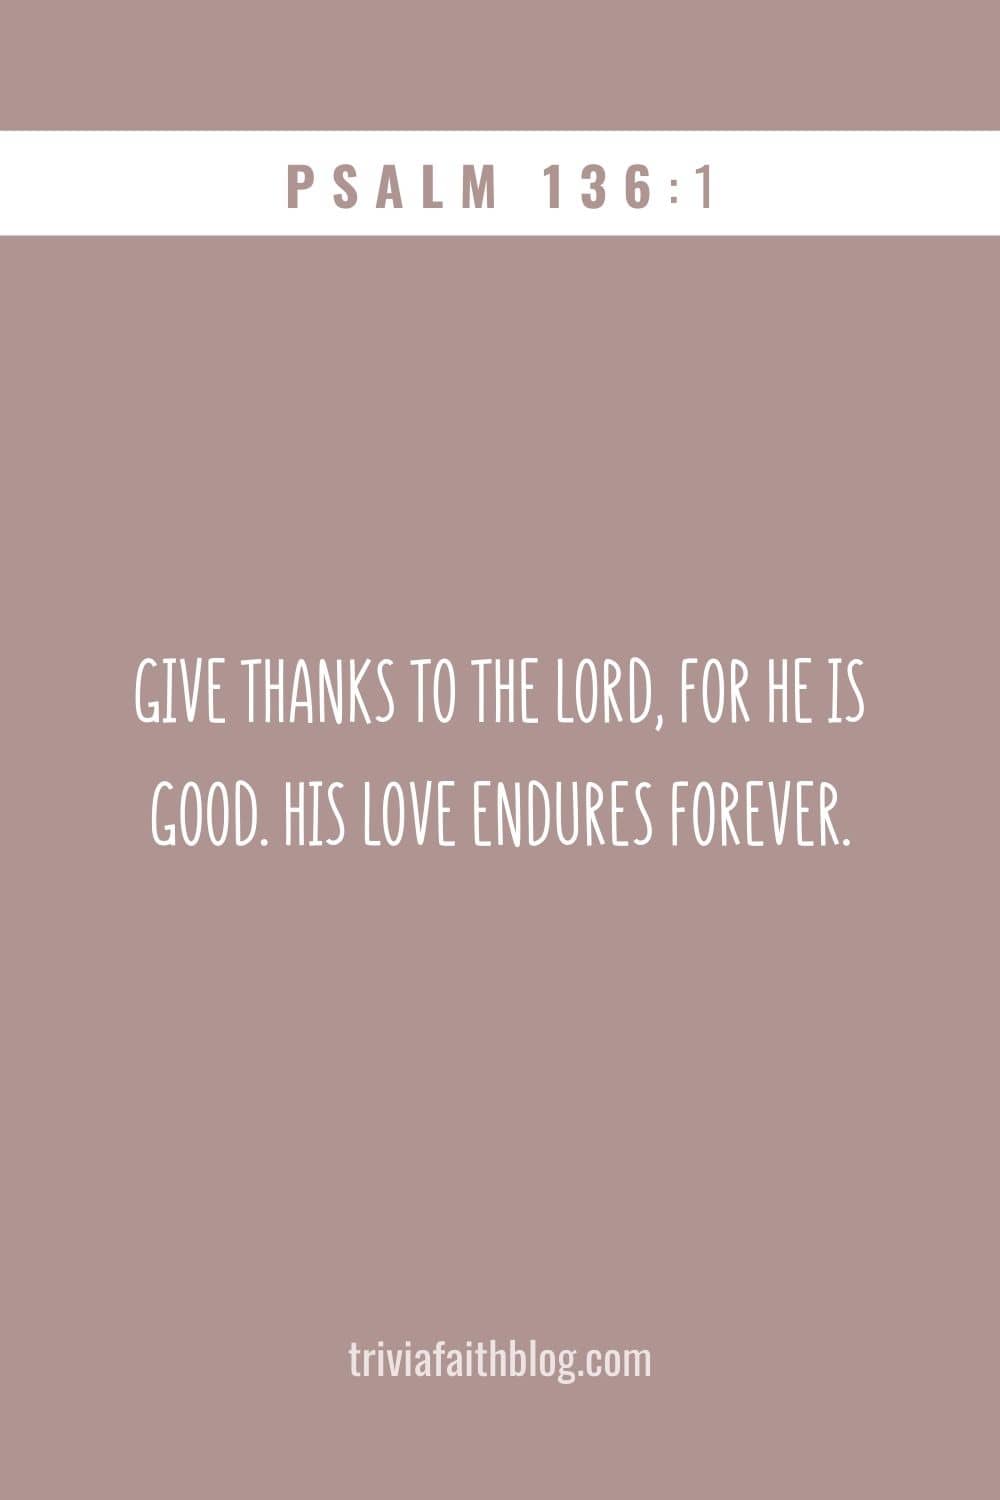 Give thanks to the Lord, for he is good. His love endures forever